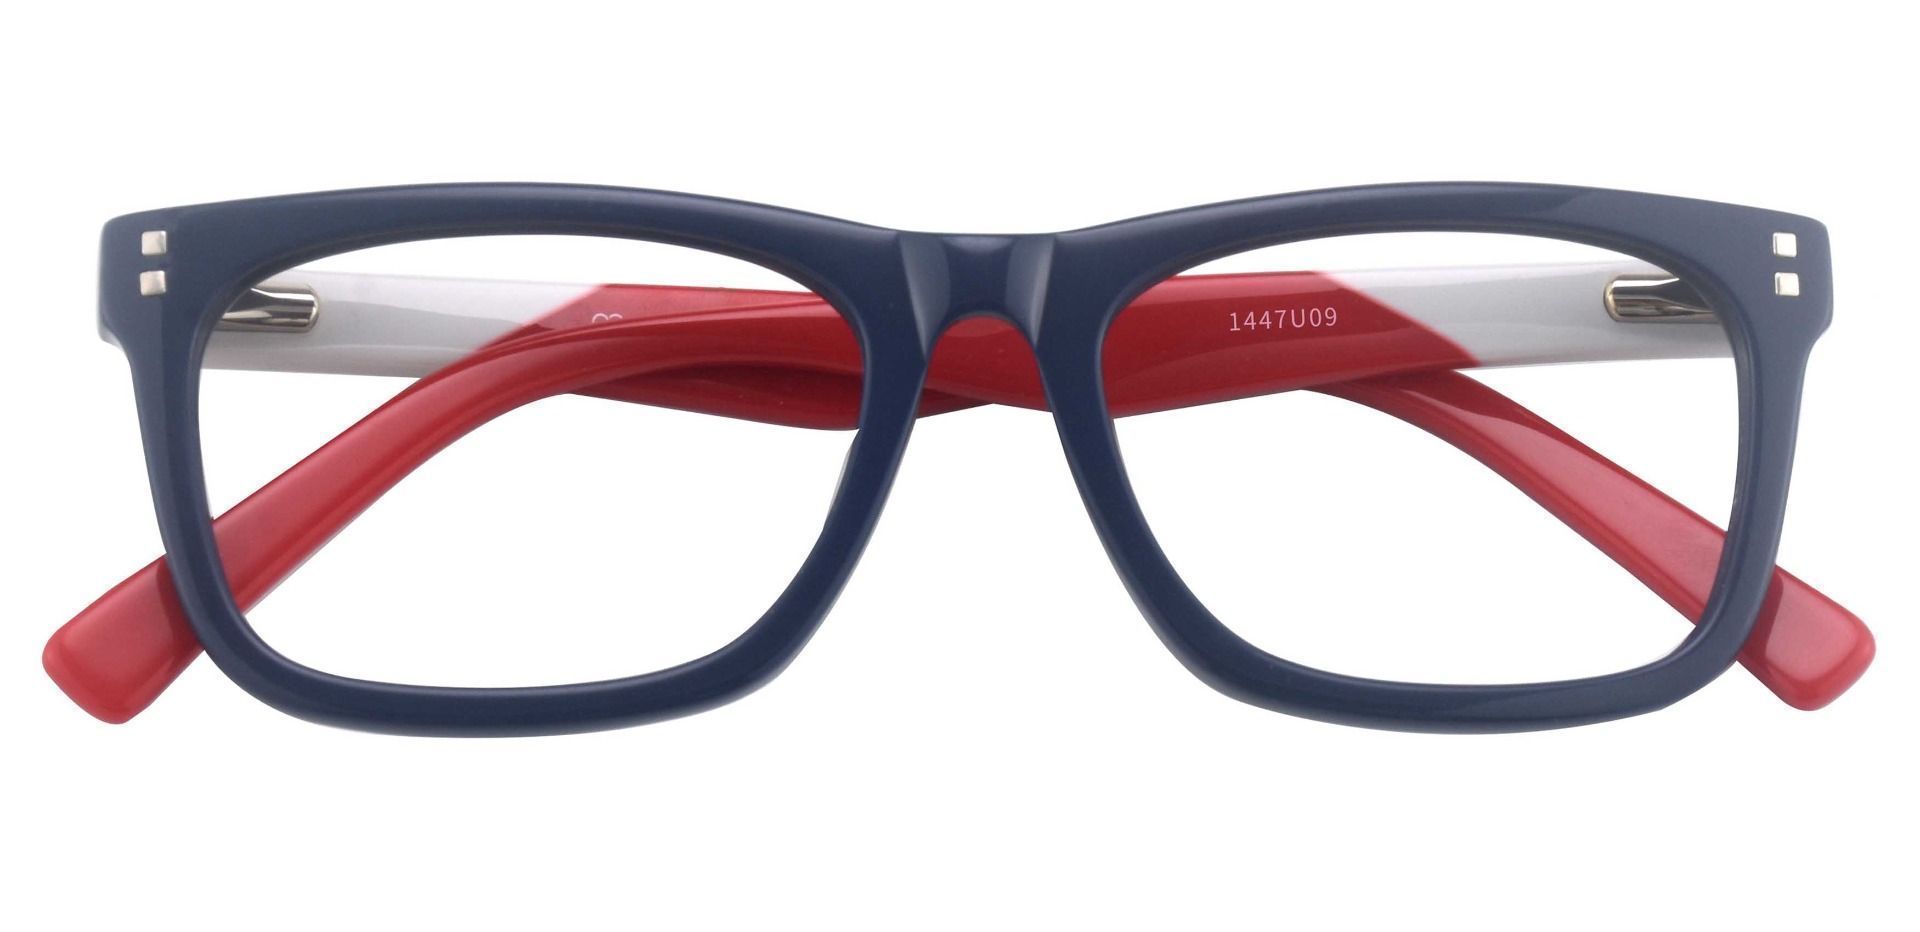 Harbor Rectangle Eyeglasses Frame - The Frame Is Blue And Red